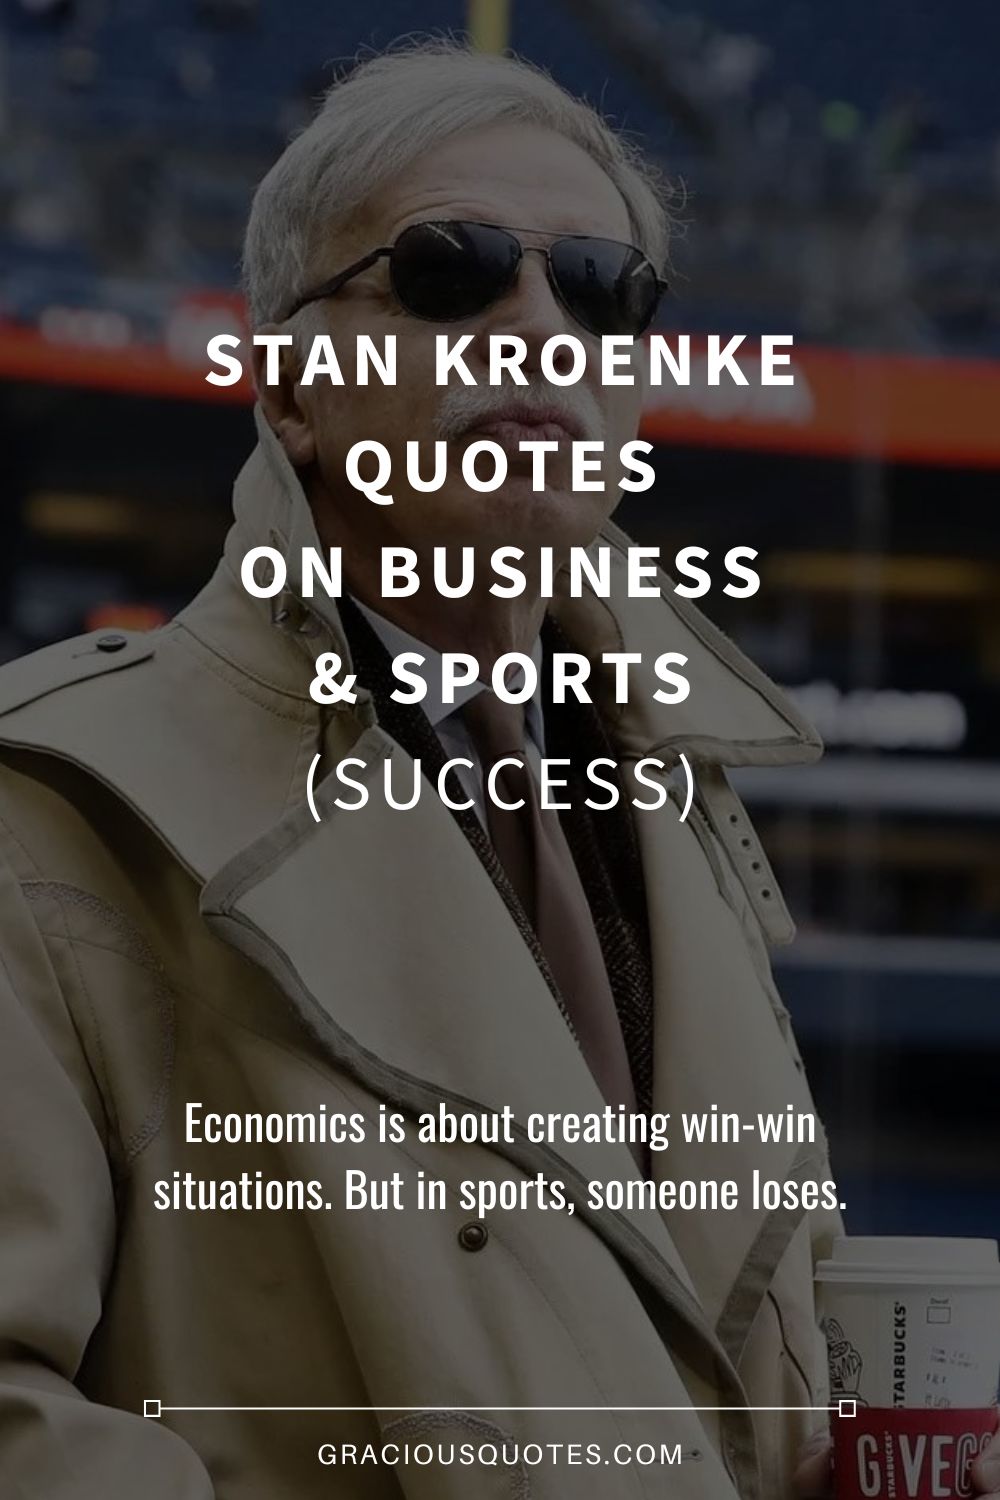 Stan Kroenke Quotes on Business & Sports (SUCCESS) - Gracious Quotes